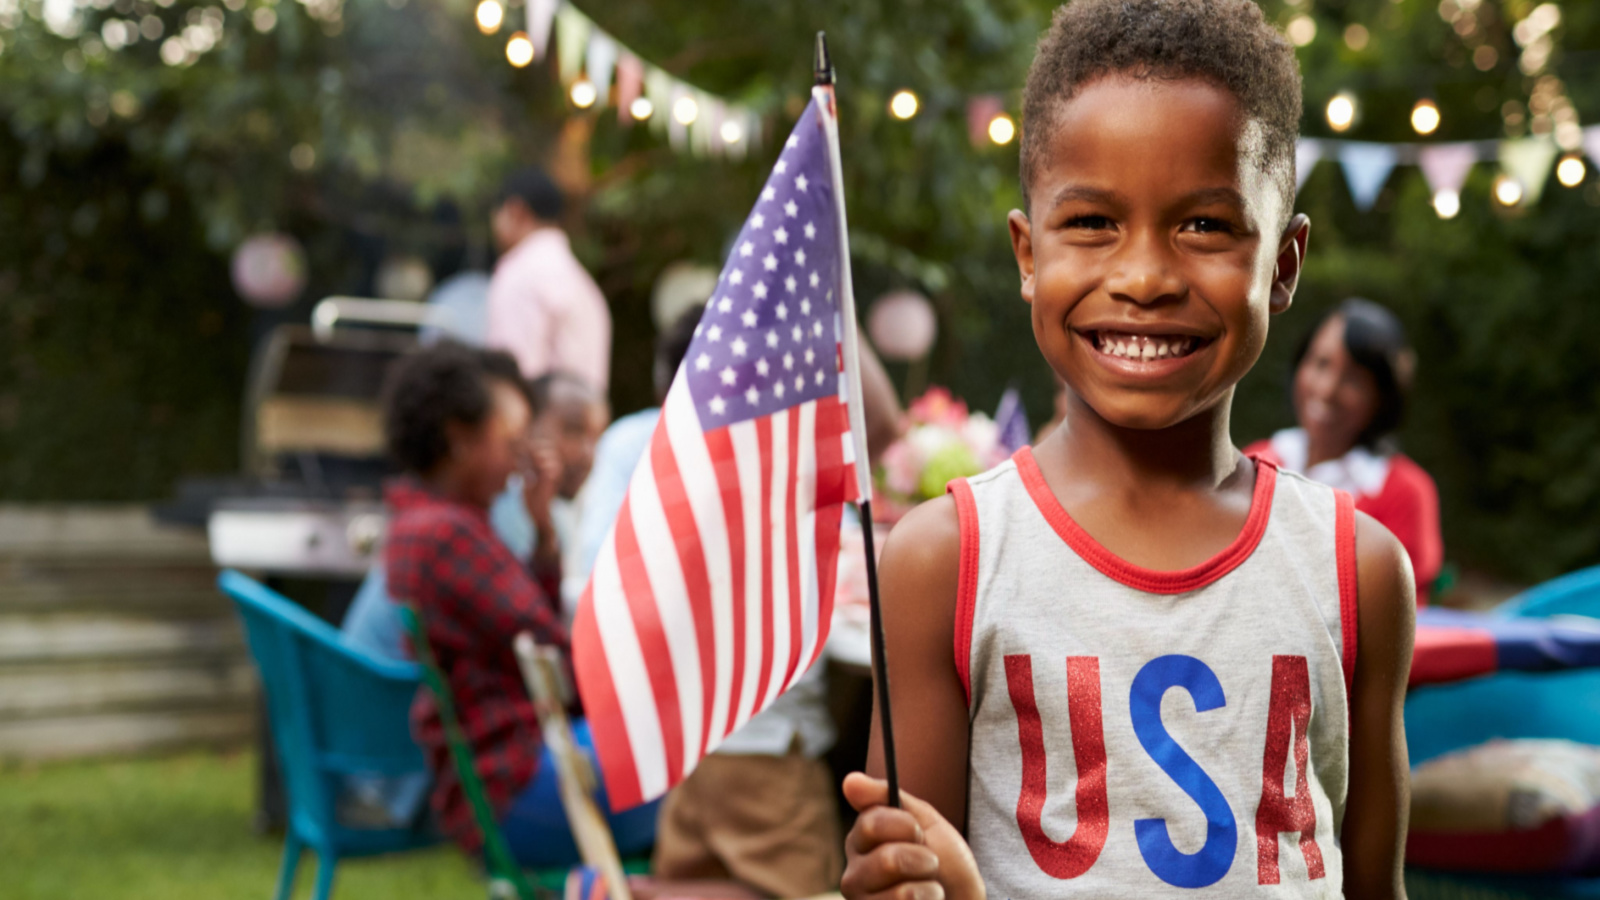 The 4th of July is the Most Dangerous Holiday Weekend | Personal Injury Lawyer St. Louis